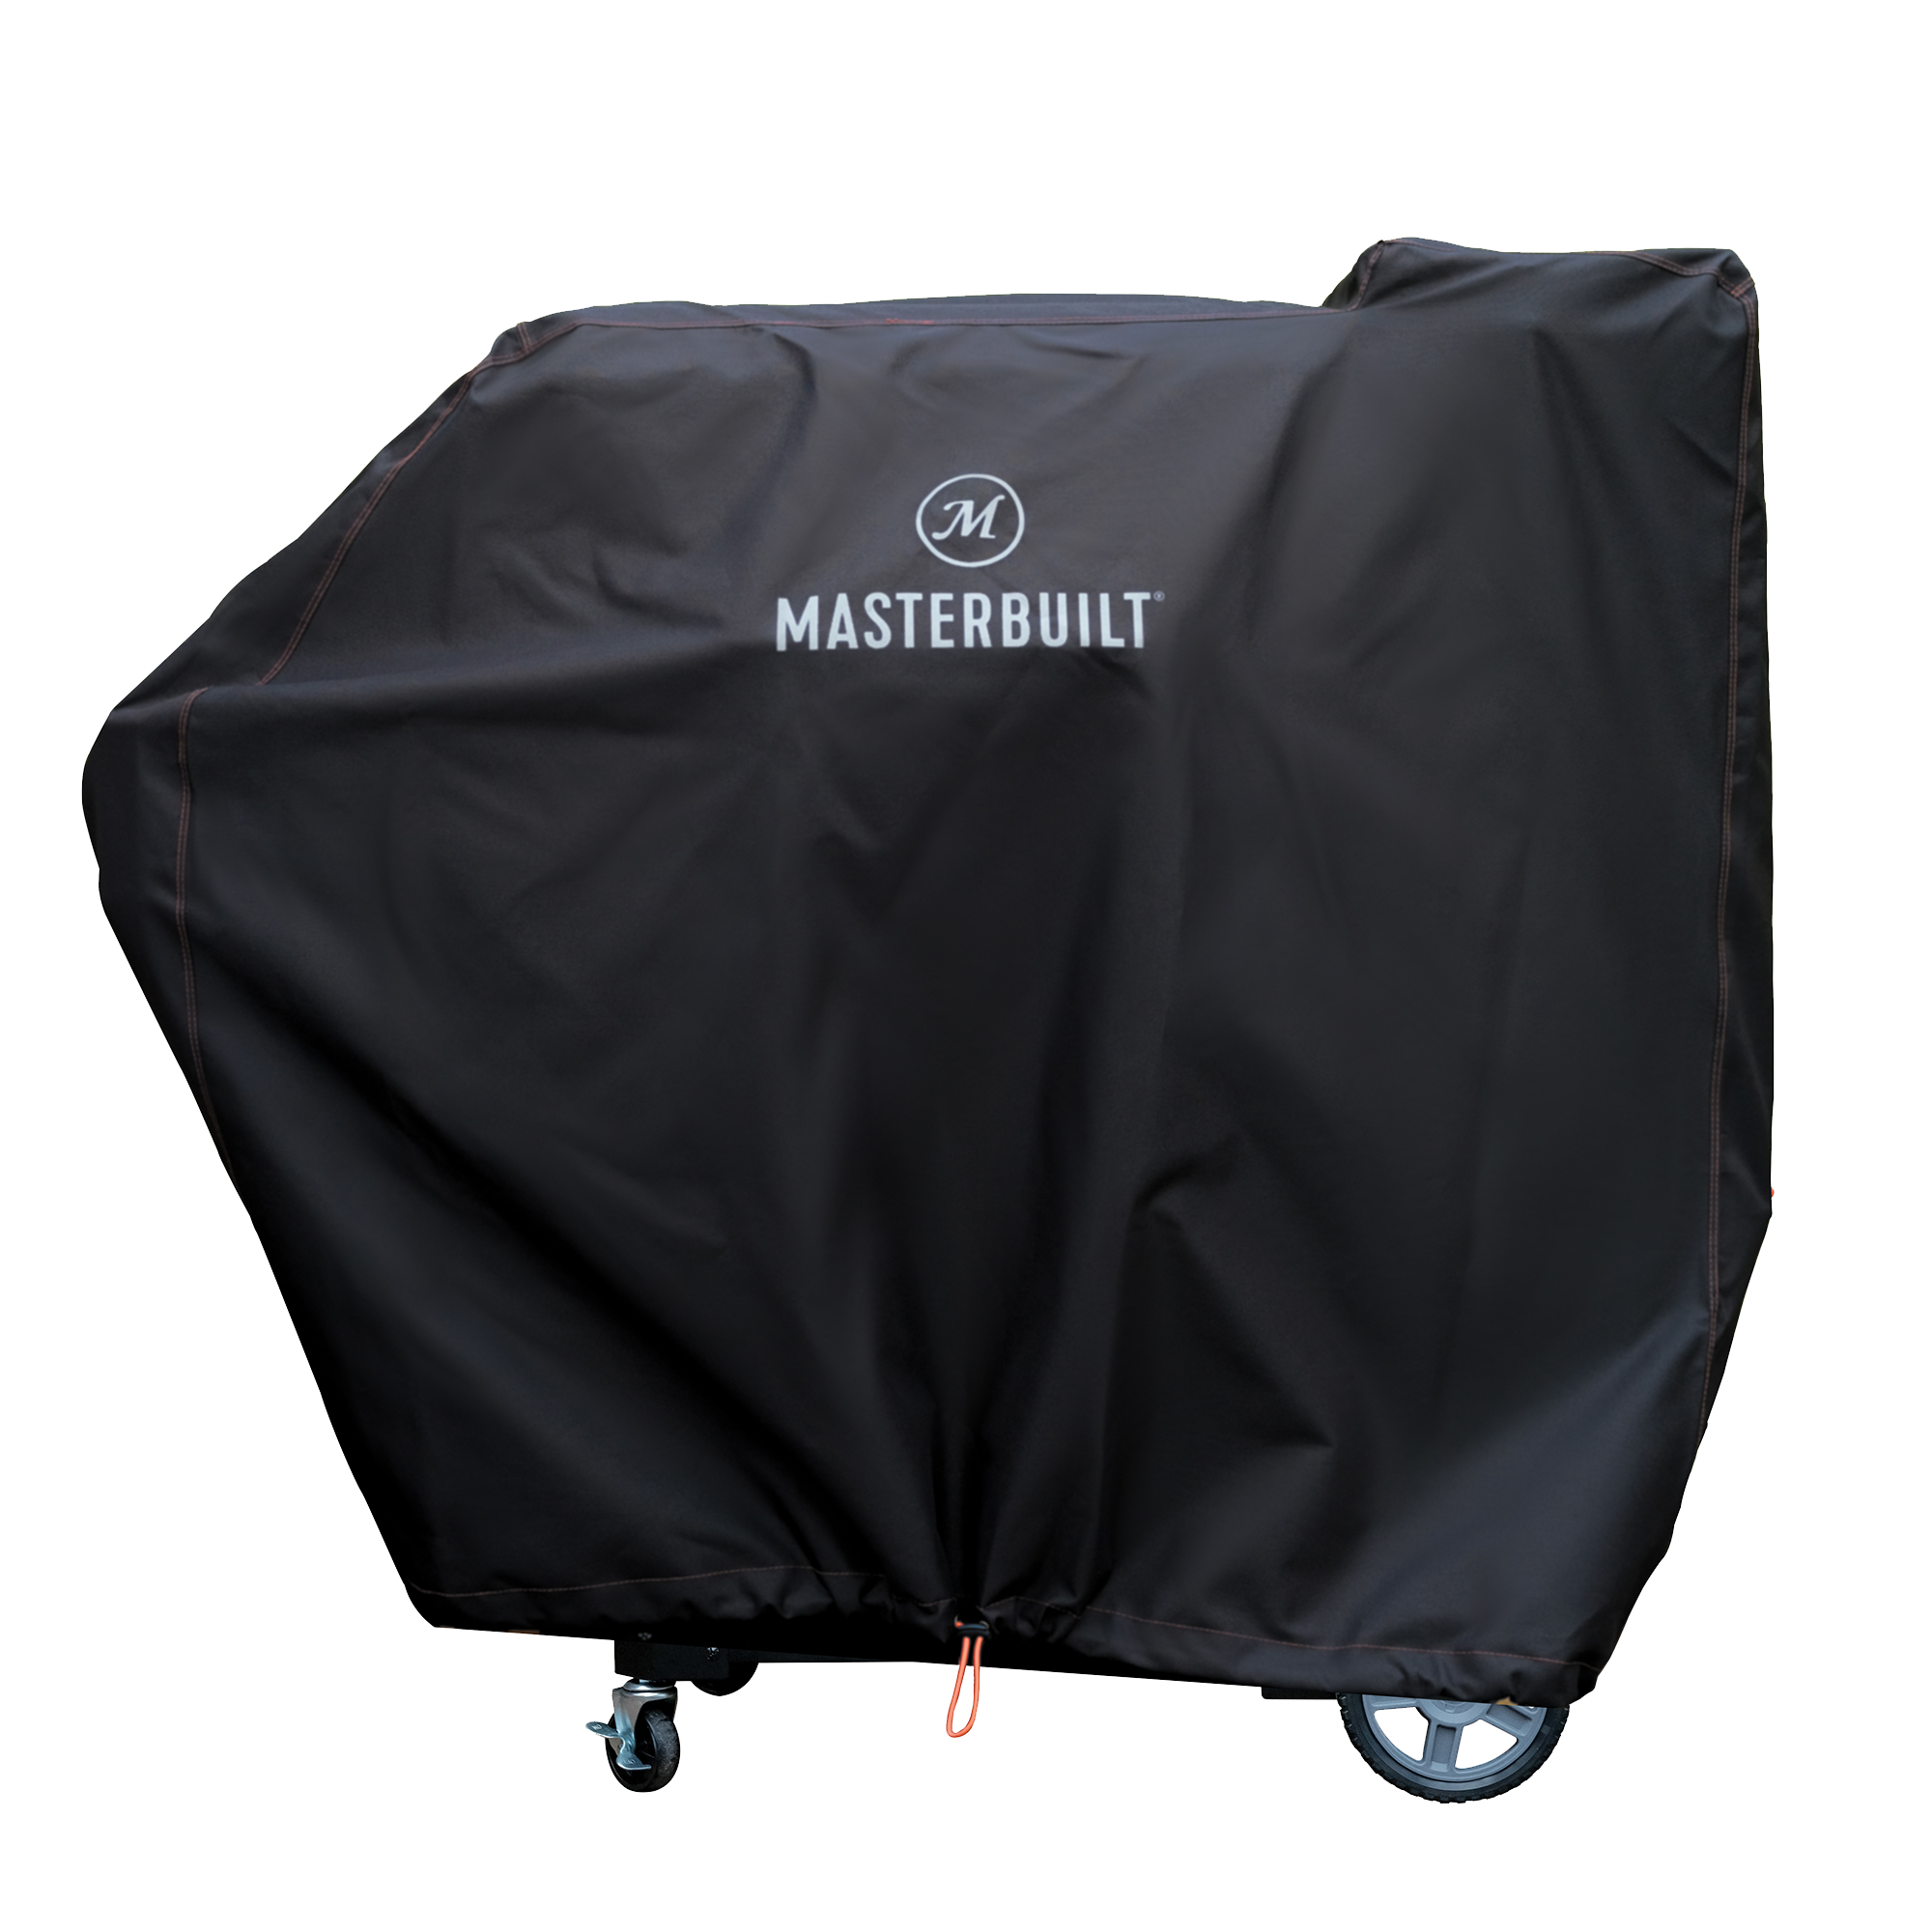 Masterbuilt Gravity Series 800 Digital Charcoal Grill, Griddle, and Smoker Cover